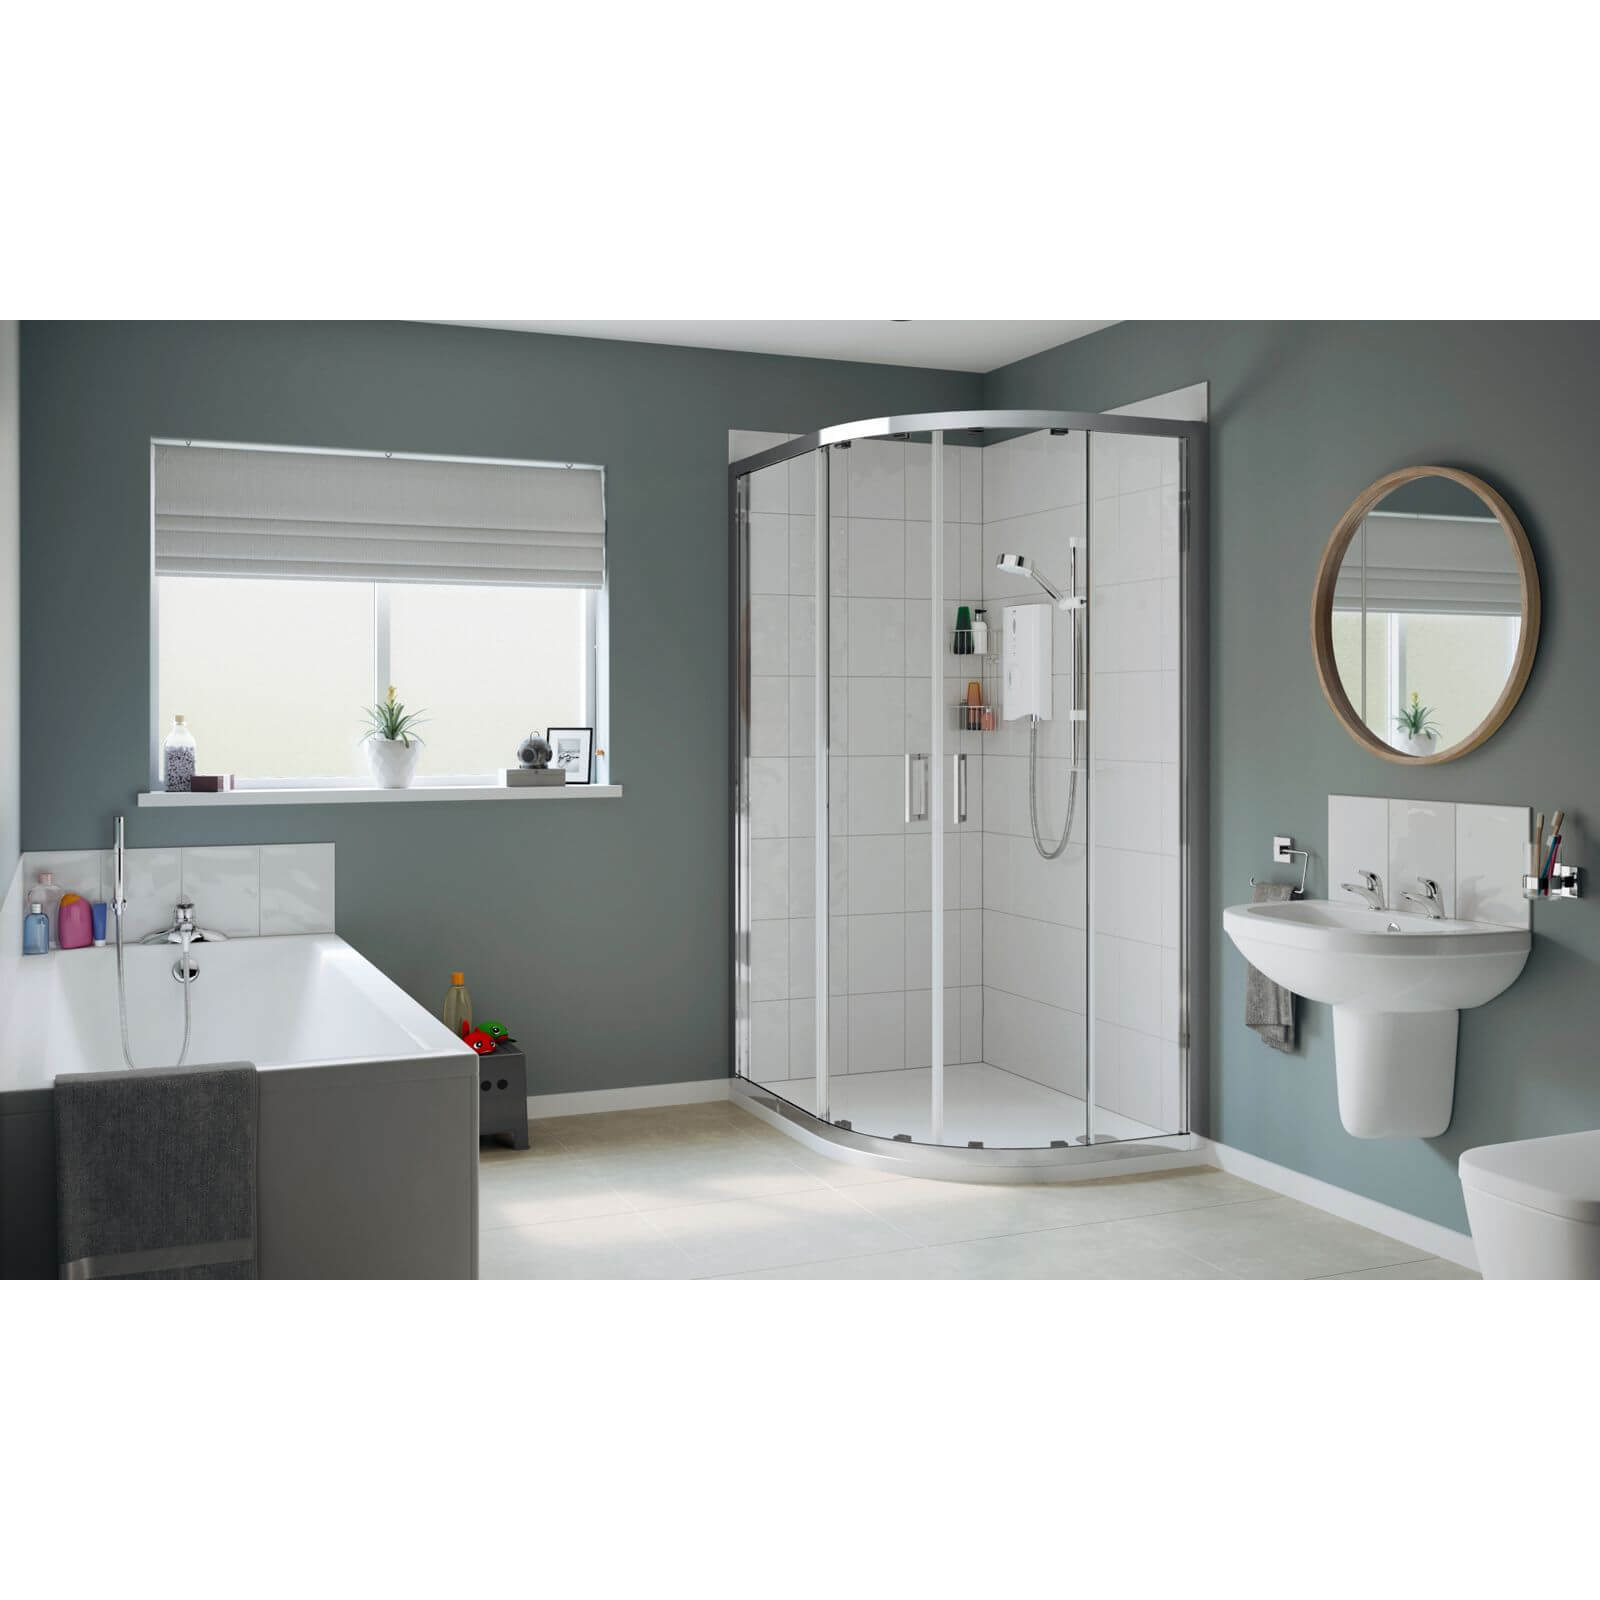 Mira Sport Max 10.8kW Electric Shower